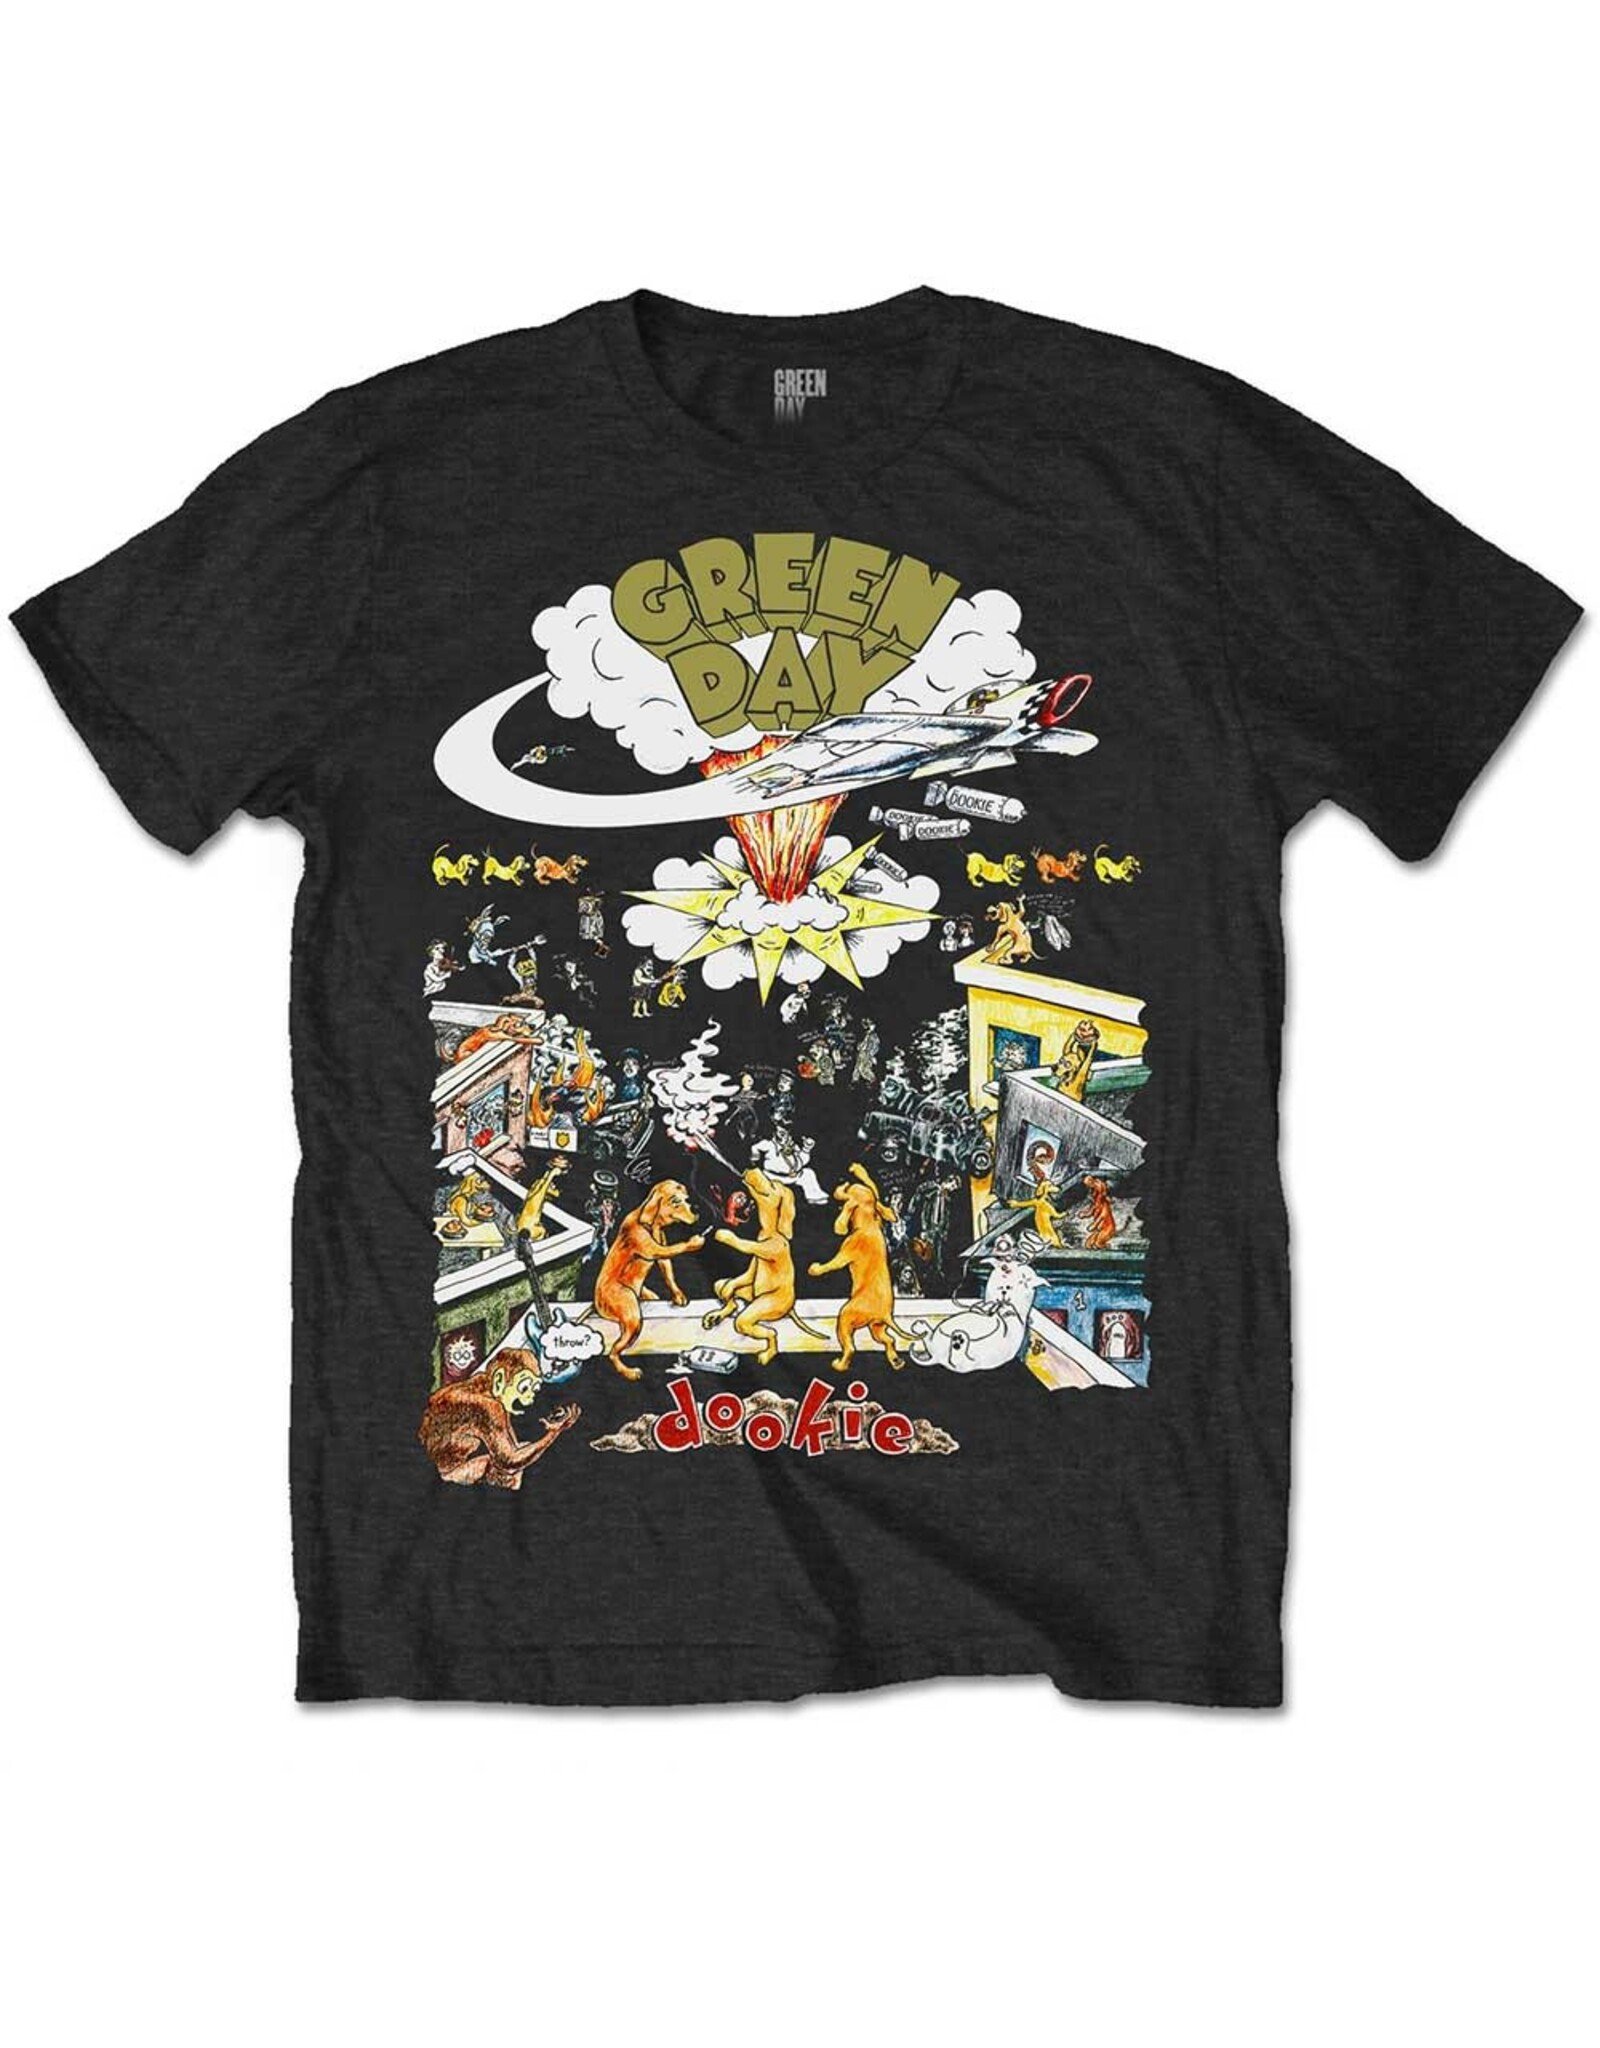 Green Day / Dookie 30th Anniversary Tee